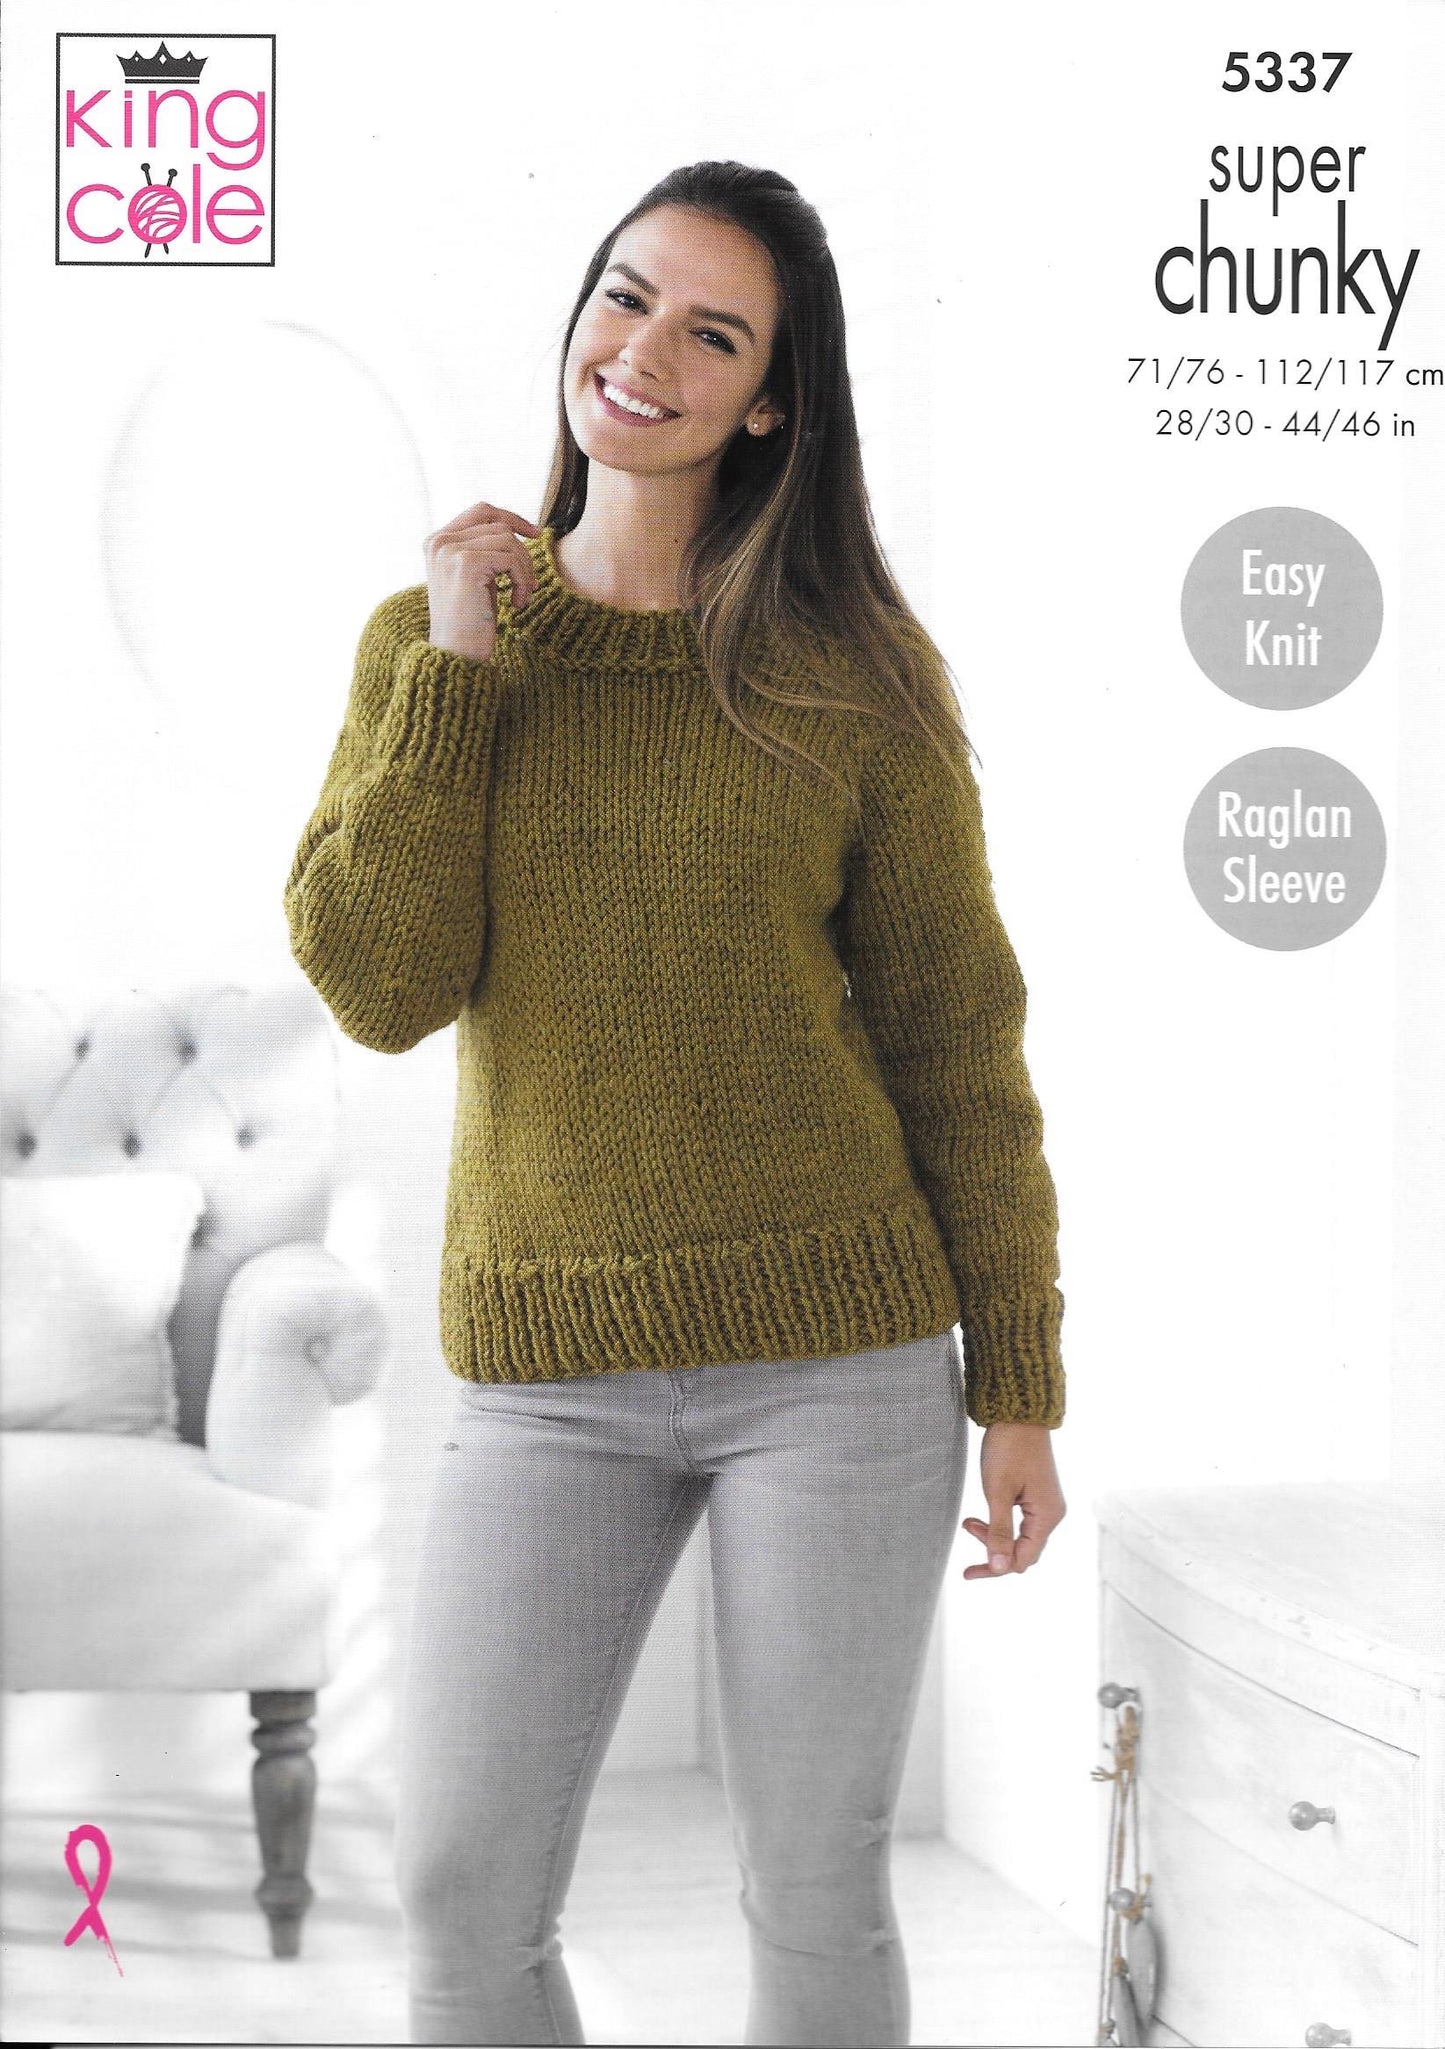 5337 King Cole Super Chunky Ladies Sweater and Cardigan knitting pattern